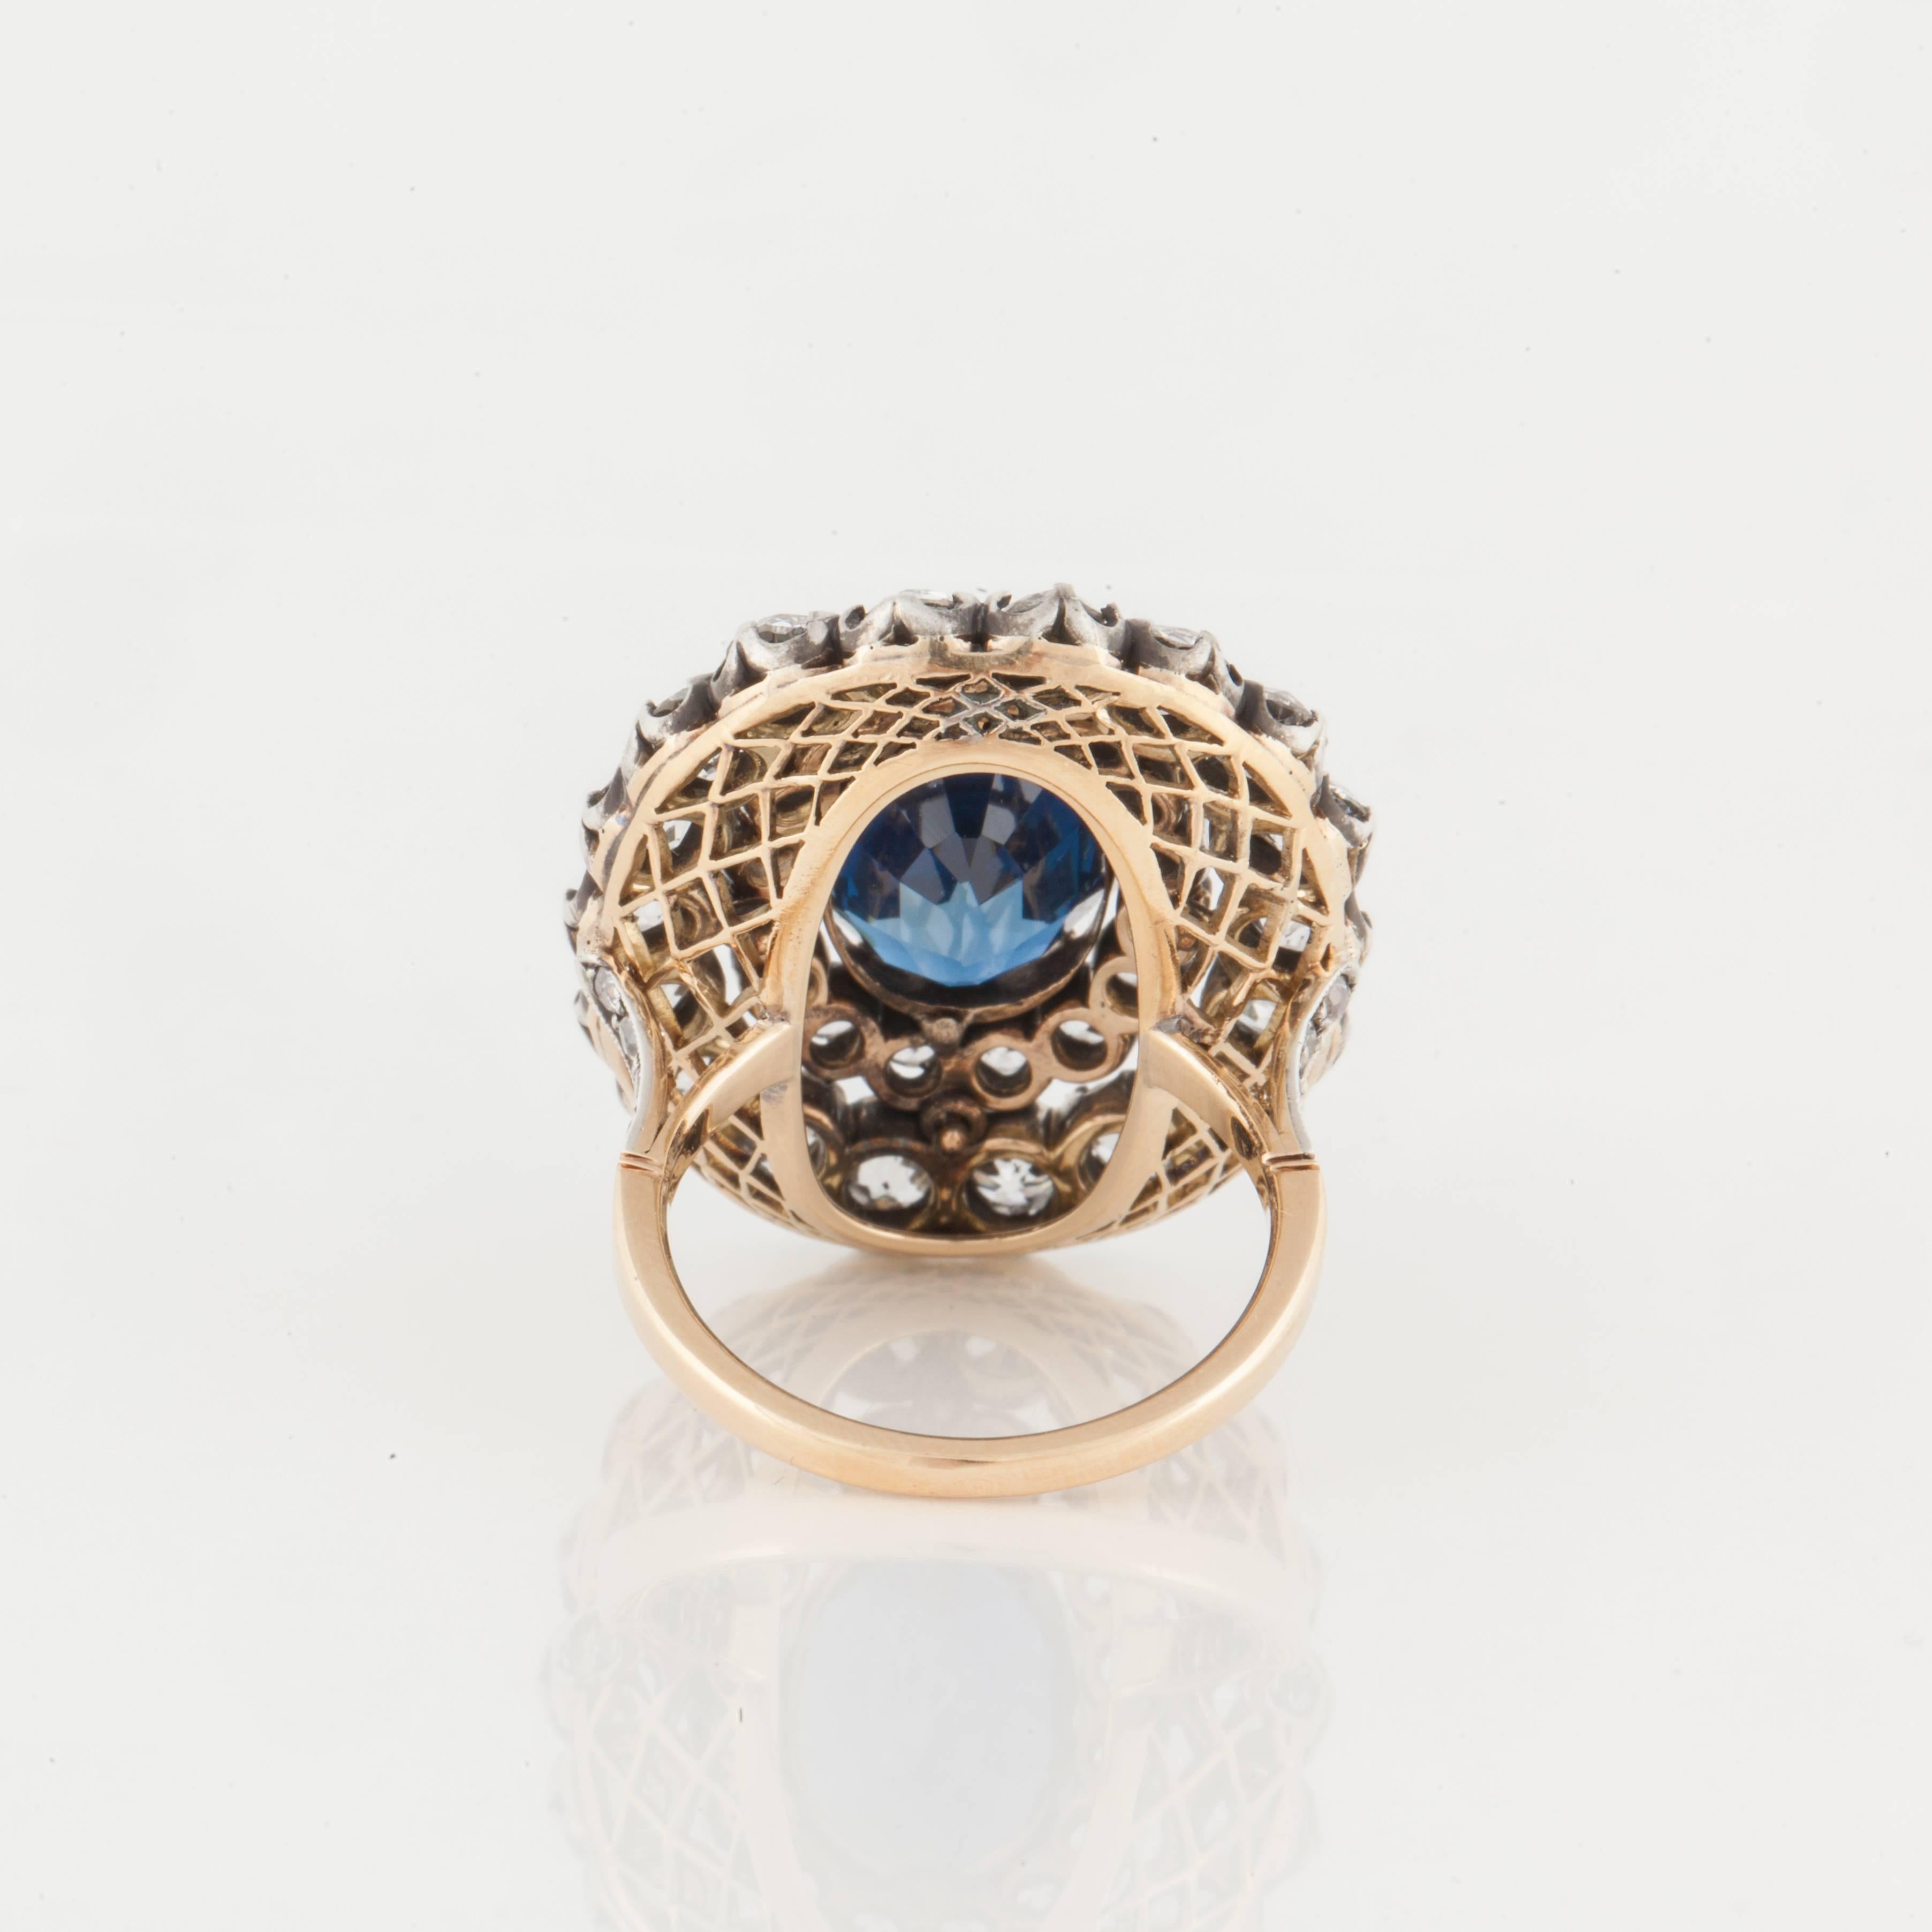 Victorian 6.78 Carat Sapphire and Diamond Ring in Sterling Silver and 18K Gold In Good Condition For Sale In Houston, TX